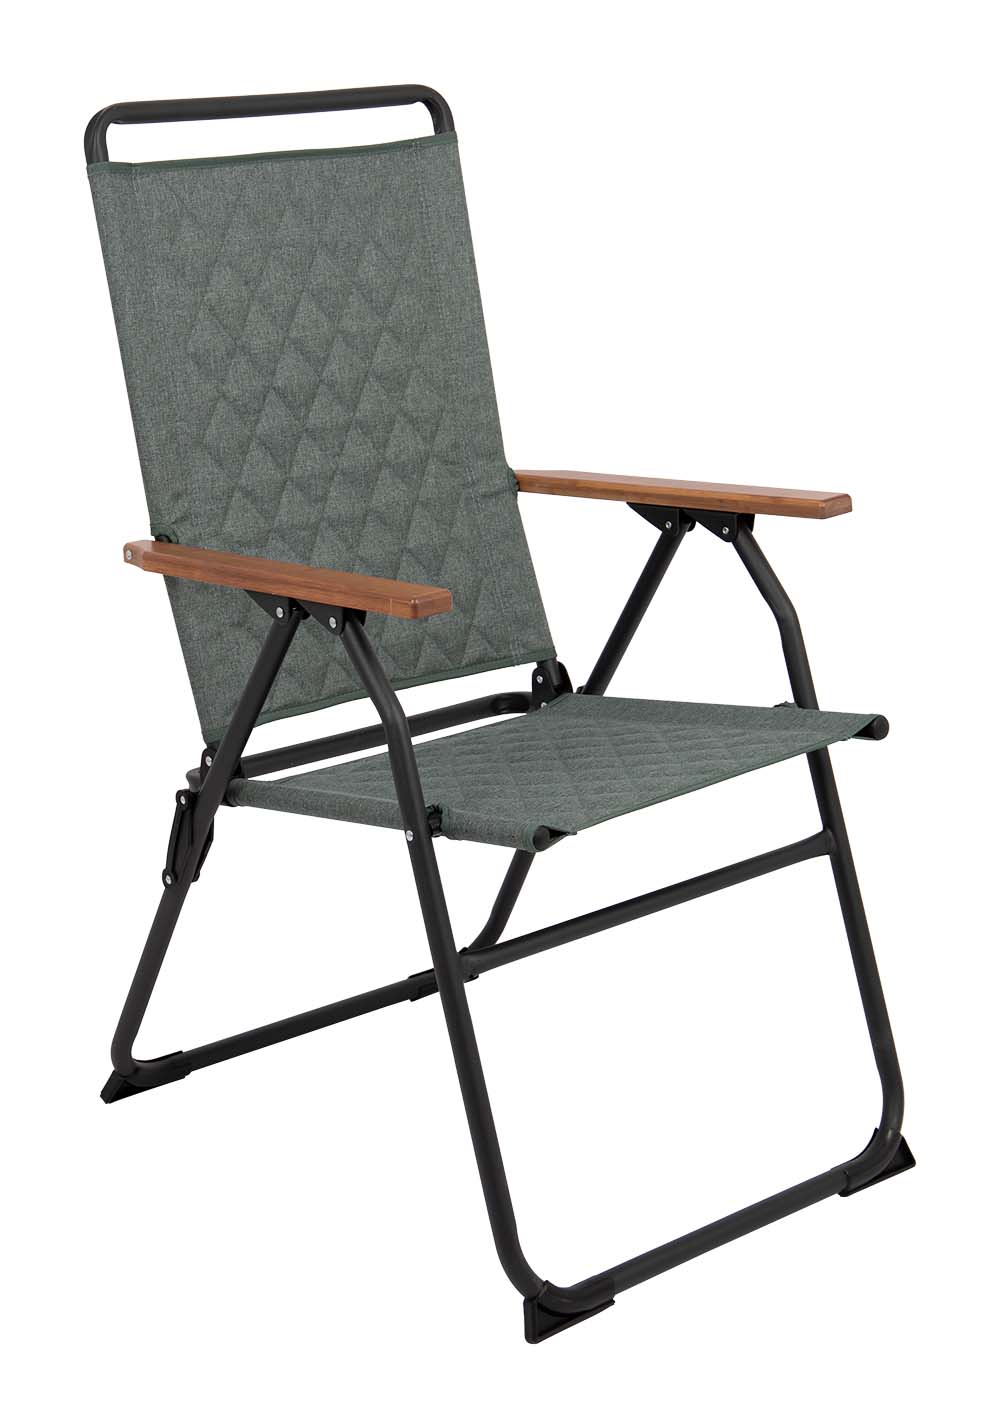 1211888 A modern en comfortable folding chair from the Industrial collection. Equipped with a padded Cationic upholstery for ultimate comfort, a lightweight aluminum frame and bamboo armrests. In addition, the stitching has a modern pattern. An ideal chair for the garden or camping, but also on the balcony and in the living room. Compact and easy to carry.